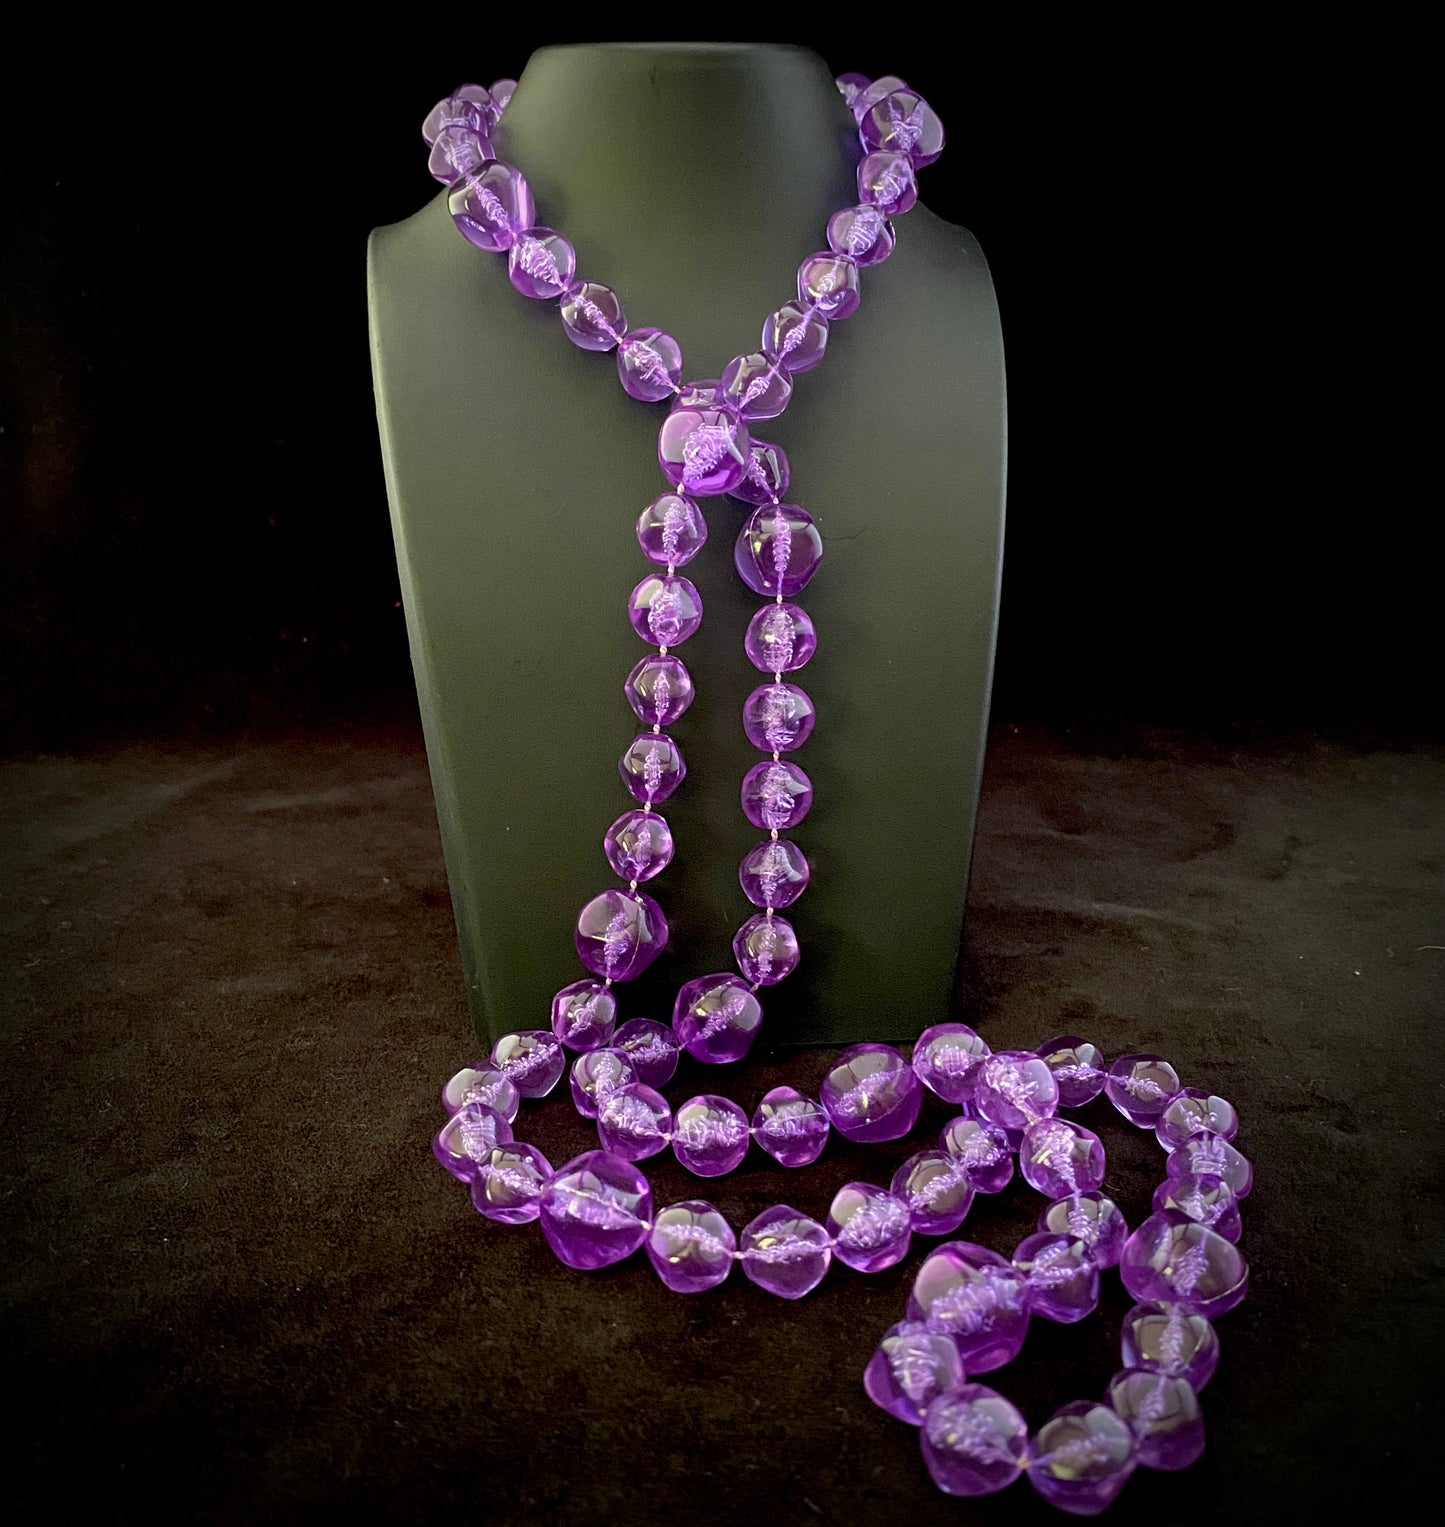 1987 Avon Purple Dawn Necklace and Earrings - Retro Kandy Vintage